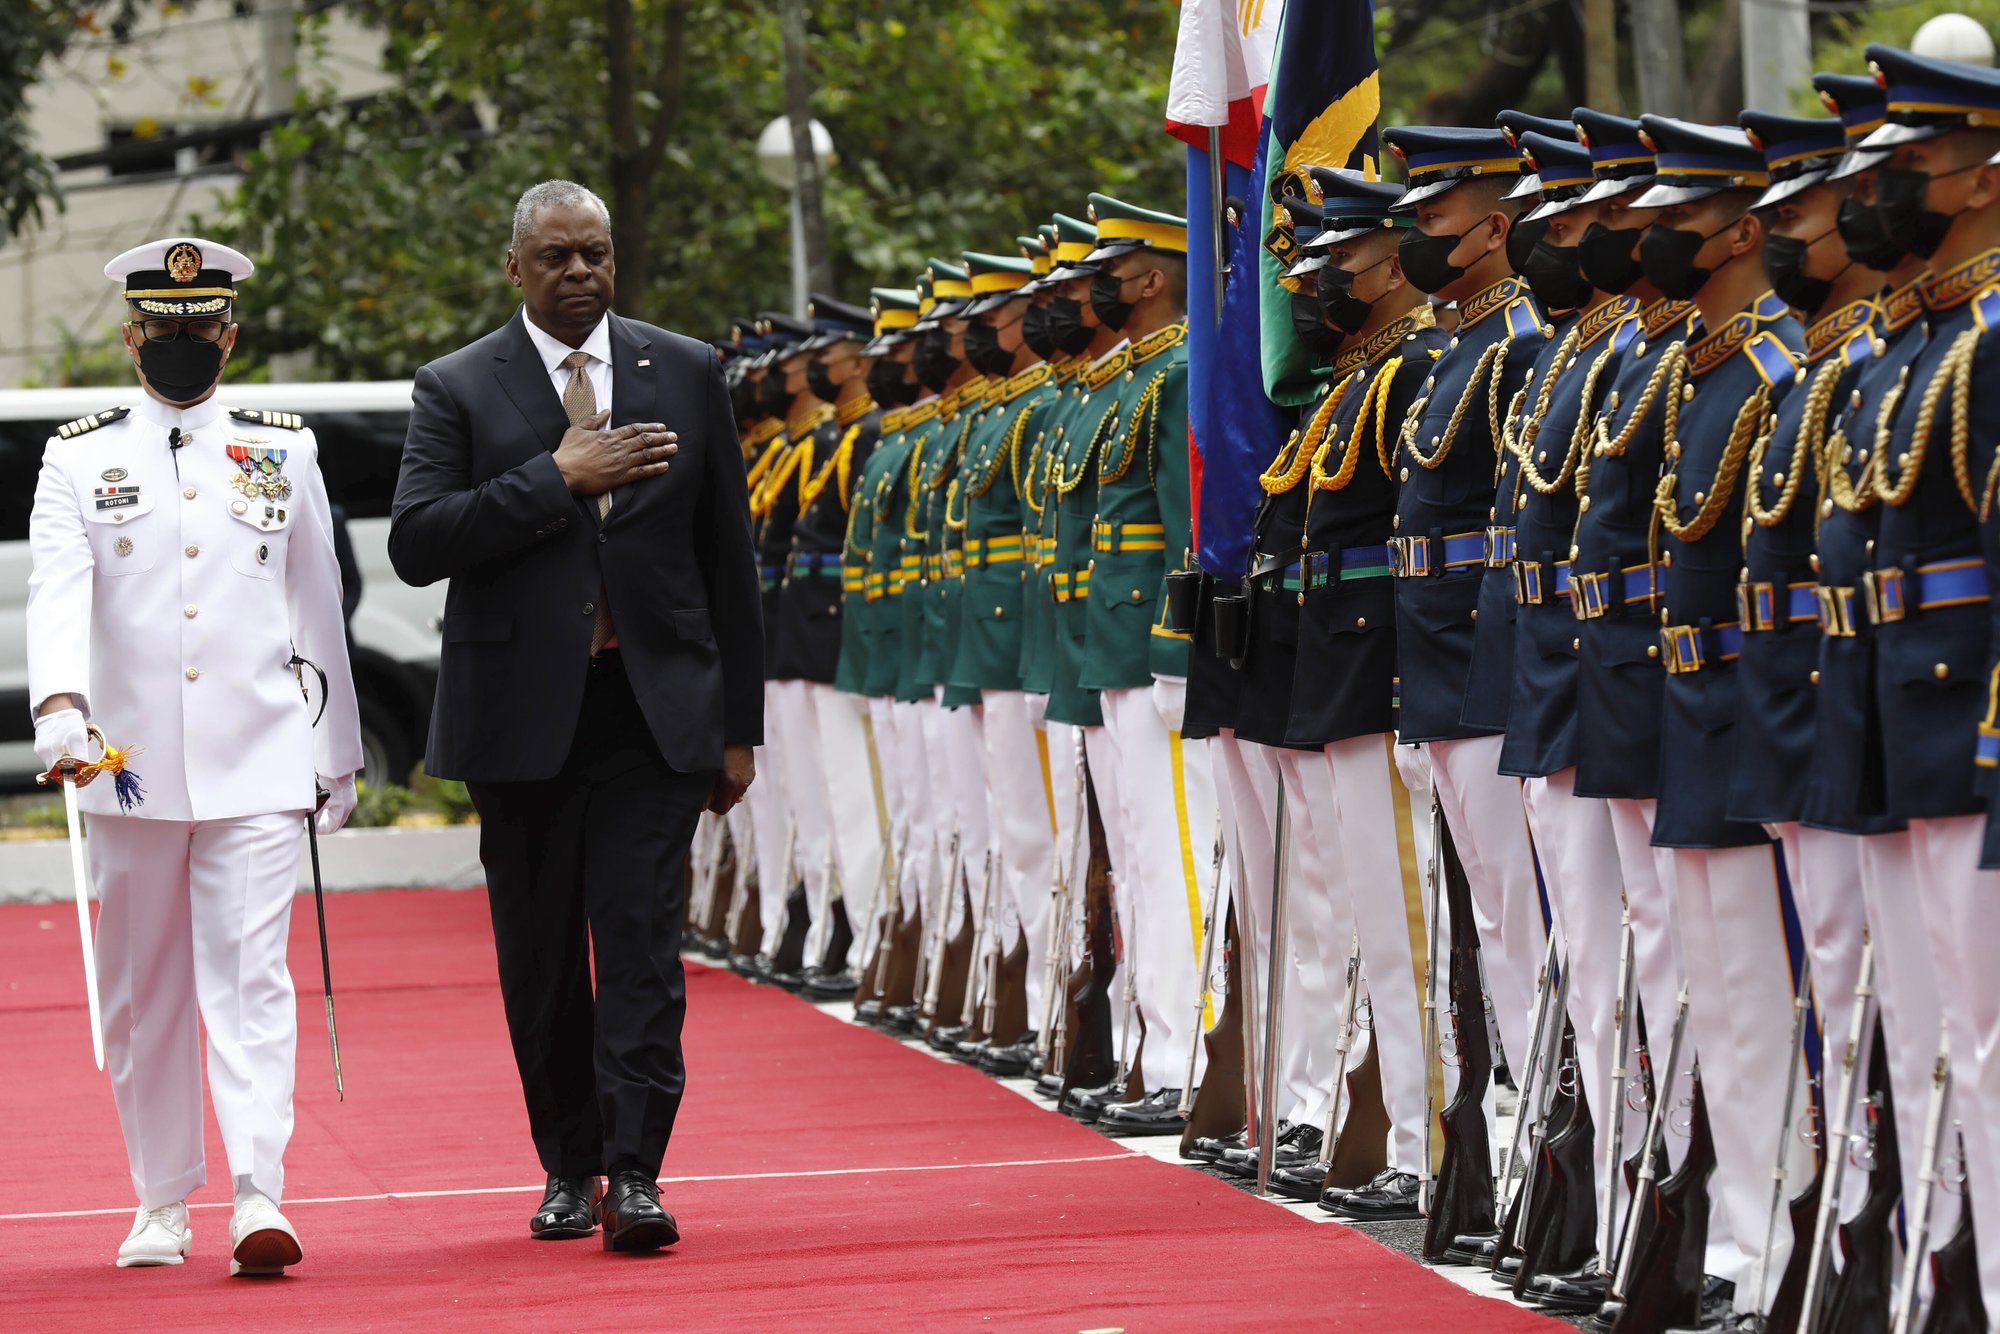 U.S. Defense Secretary Lloyd Austin, second from left, walks past military guards during his arrival at the Department of National Defense in Camp Aguinaldo military camp in Quezon City, Metro Manila, Philippines on Thursday February 2, 2023. Rolex Dela Pena/Pool Photo via AP.